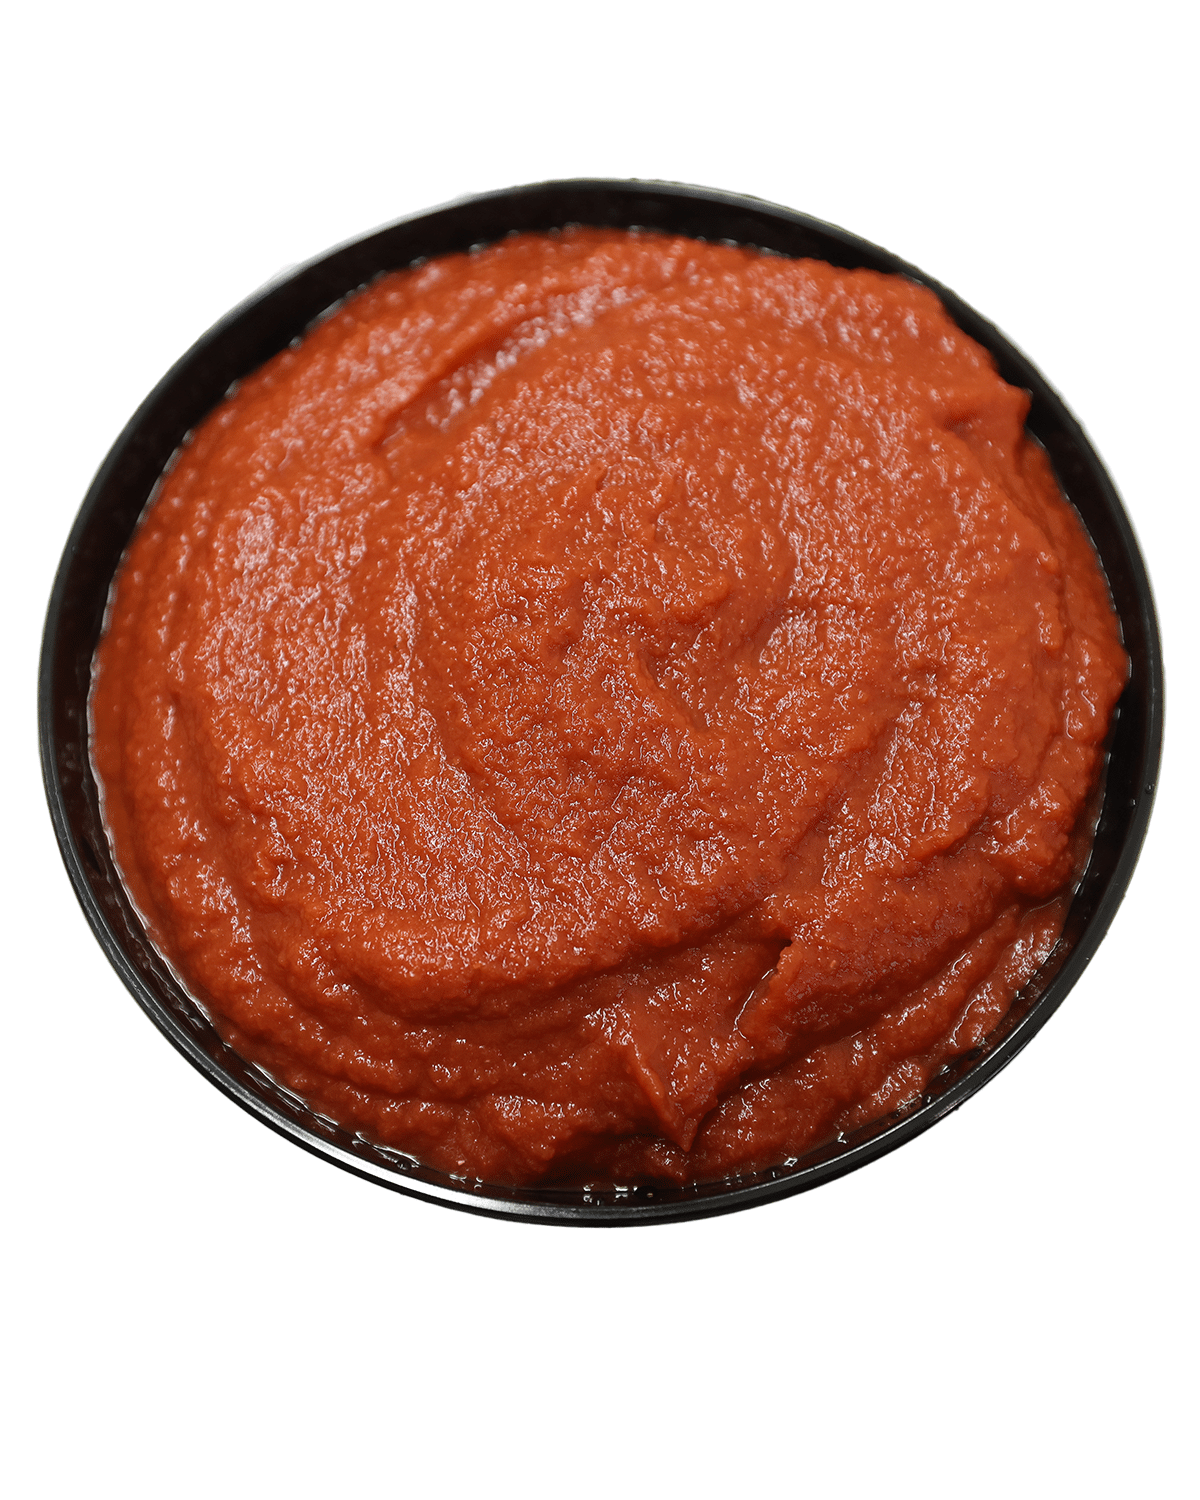 A bowl of red sauce made from Pear Tomatoes.